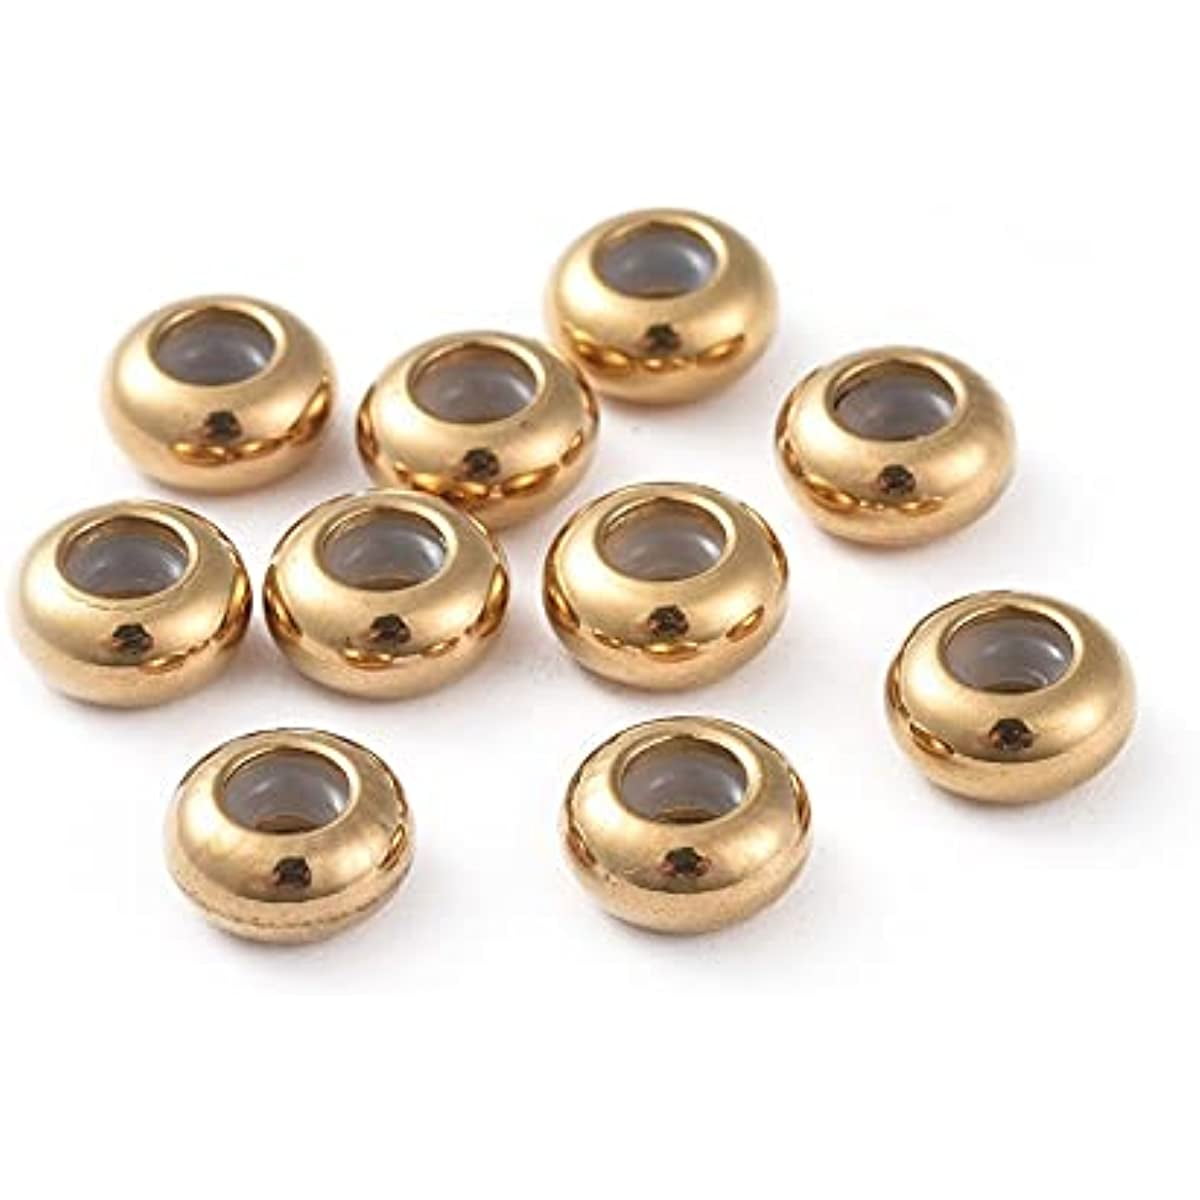 Incraftables 3000pcs Spacer Beads for Bracelets Making (Gold, Silver & Rose  Gold). Best Rondelle Spacer Beads for Jewelry Making Kit